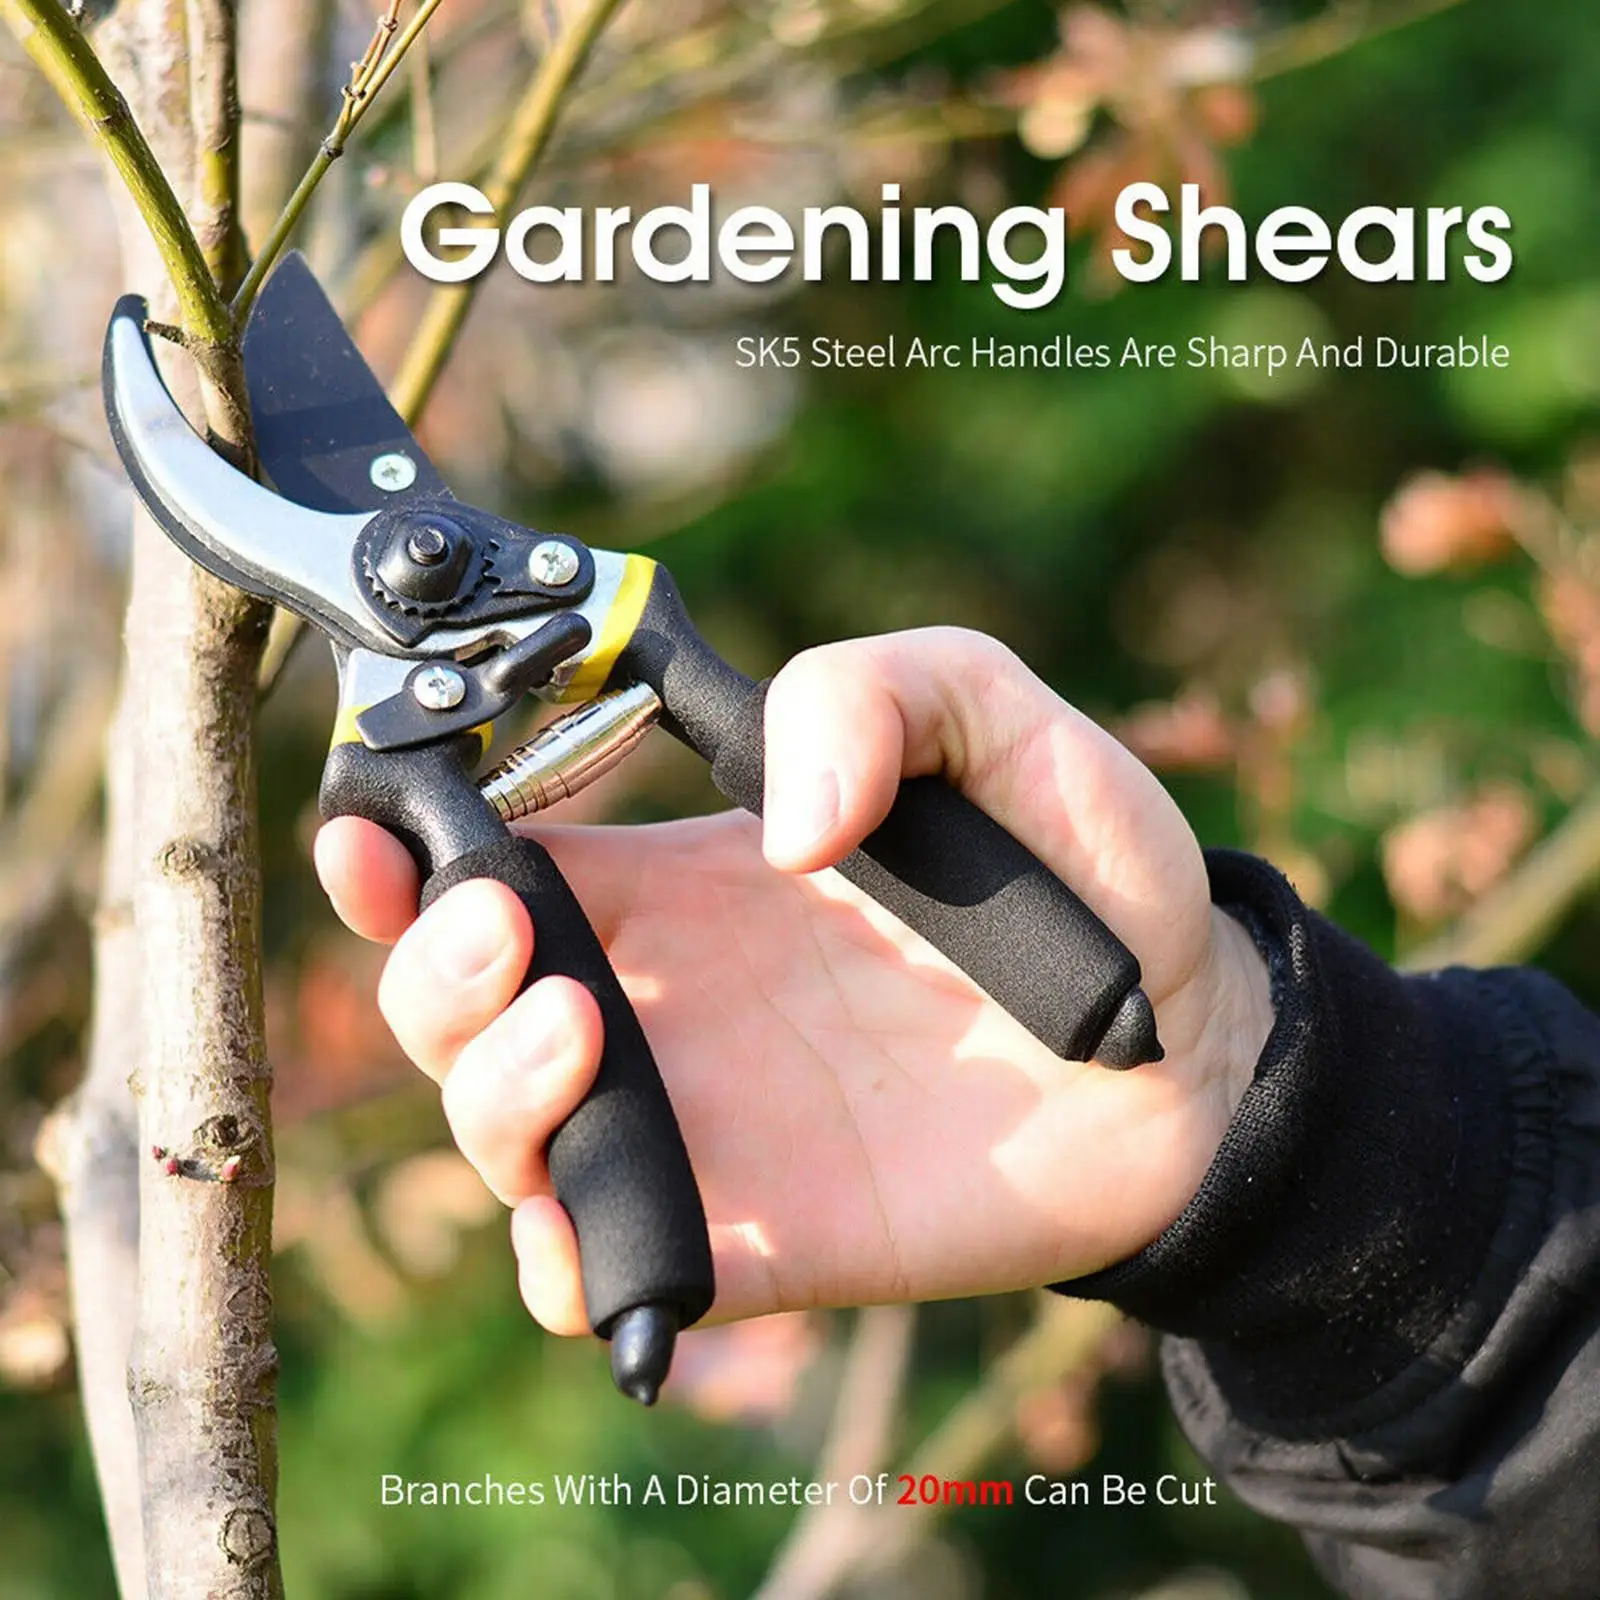 Garden Flower Pruning Shears, Tool, Gardening Clippers Scissors for Trimming Trees, Tools for Branches Plants